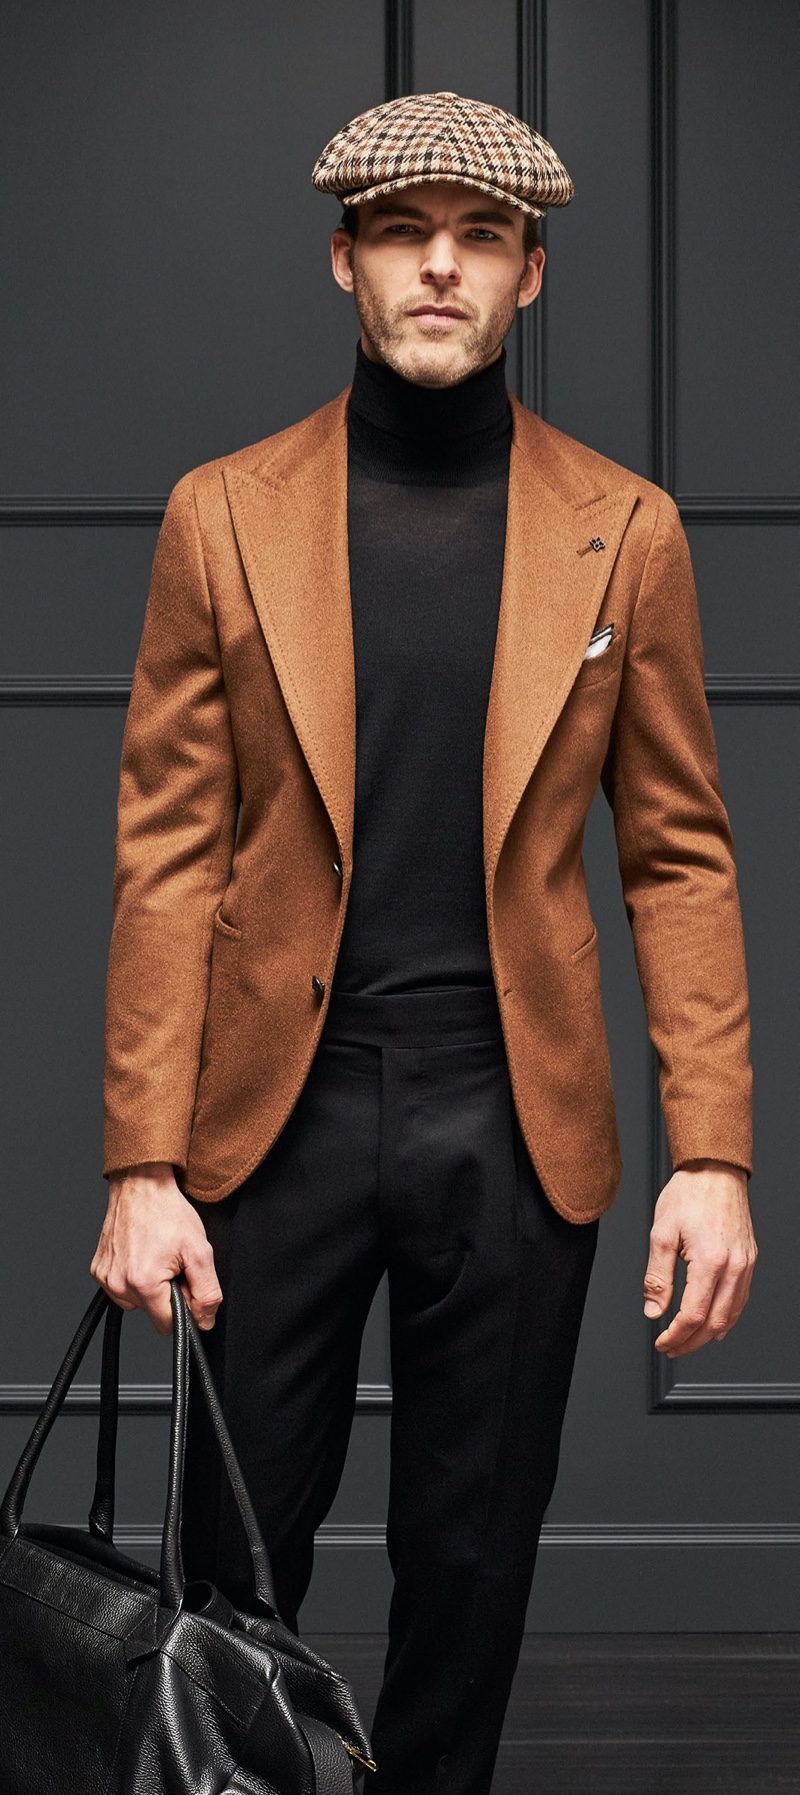 Embracing brown and black, Patrick Kafka wears fall-winter 2019 styles from Tagliatore.